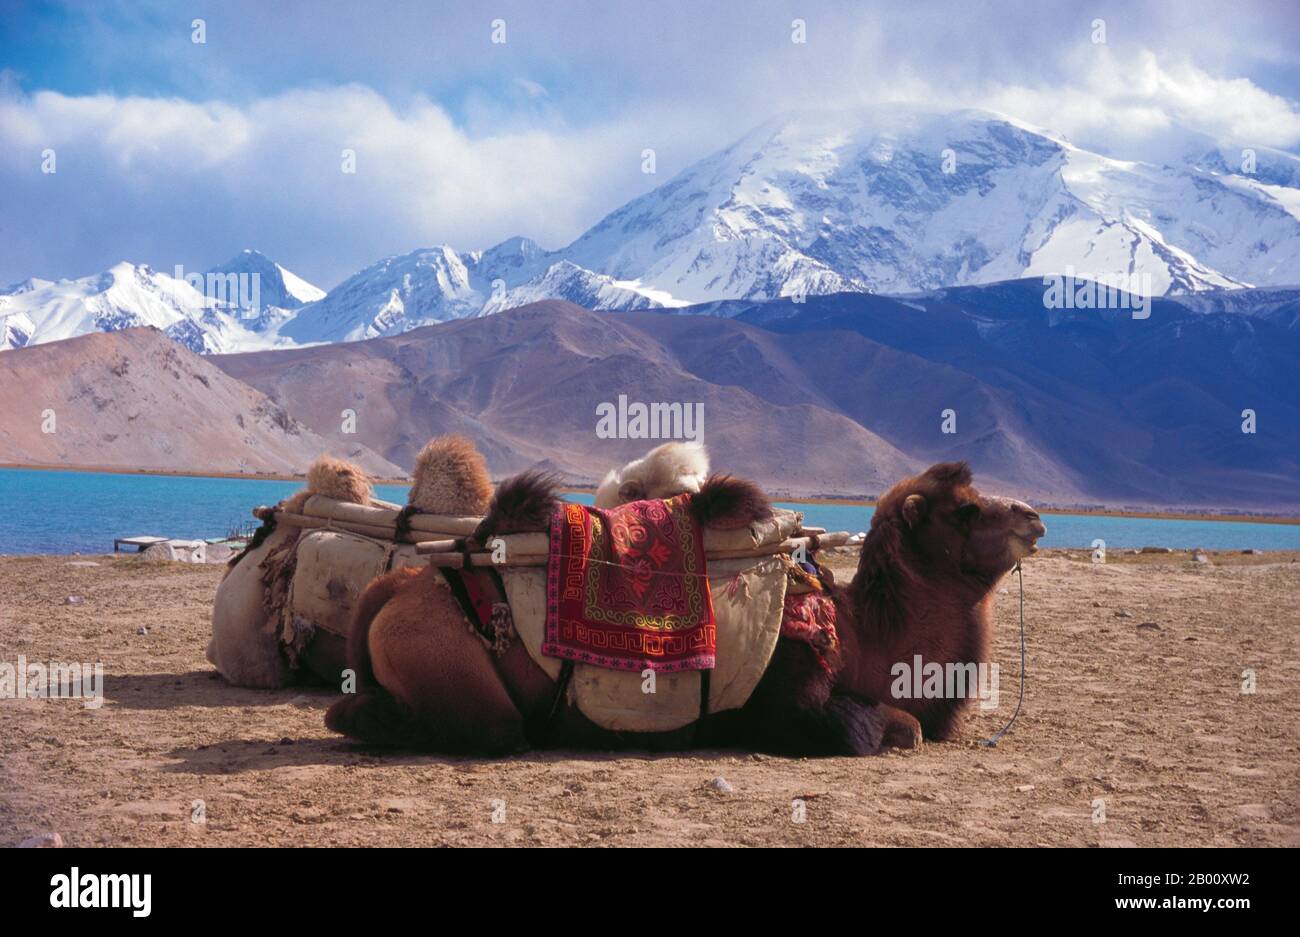 China: Bactrian camels near Lake Karakul on the Karakoram Highway, Xinjiang.  The Bactrian camel (Camelus bactrianus) is a large even-toed ungulate native to the steppes of central Asia. It is presently restricted in the wild to remote regions of the Gobi and Taklimakan Deserts of Mongolia and Xinjiang, China. The Bactrian camel has two humps on its back, in contrast to the single-humped Dromedary camel. Stock Photo